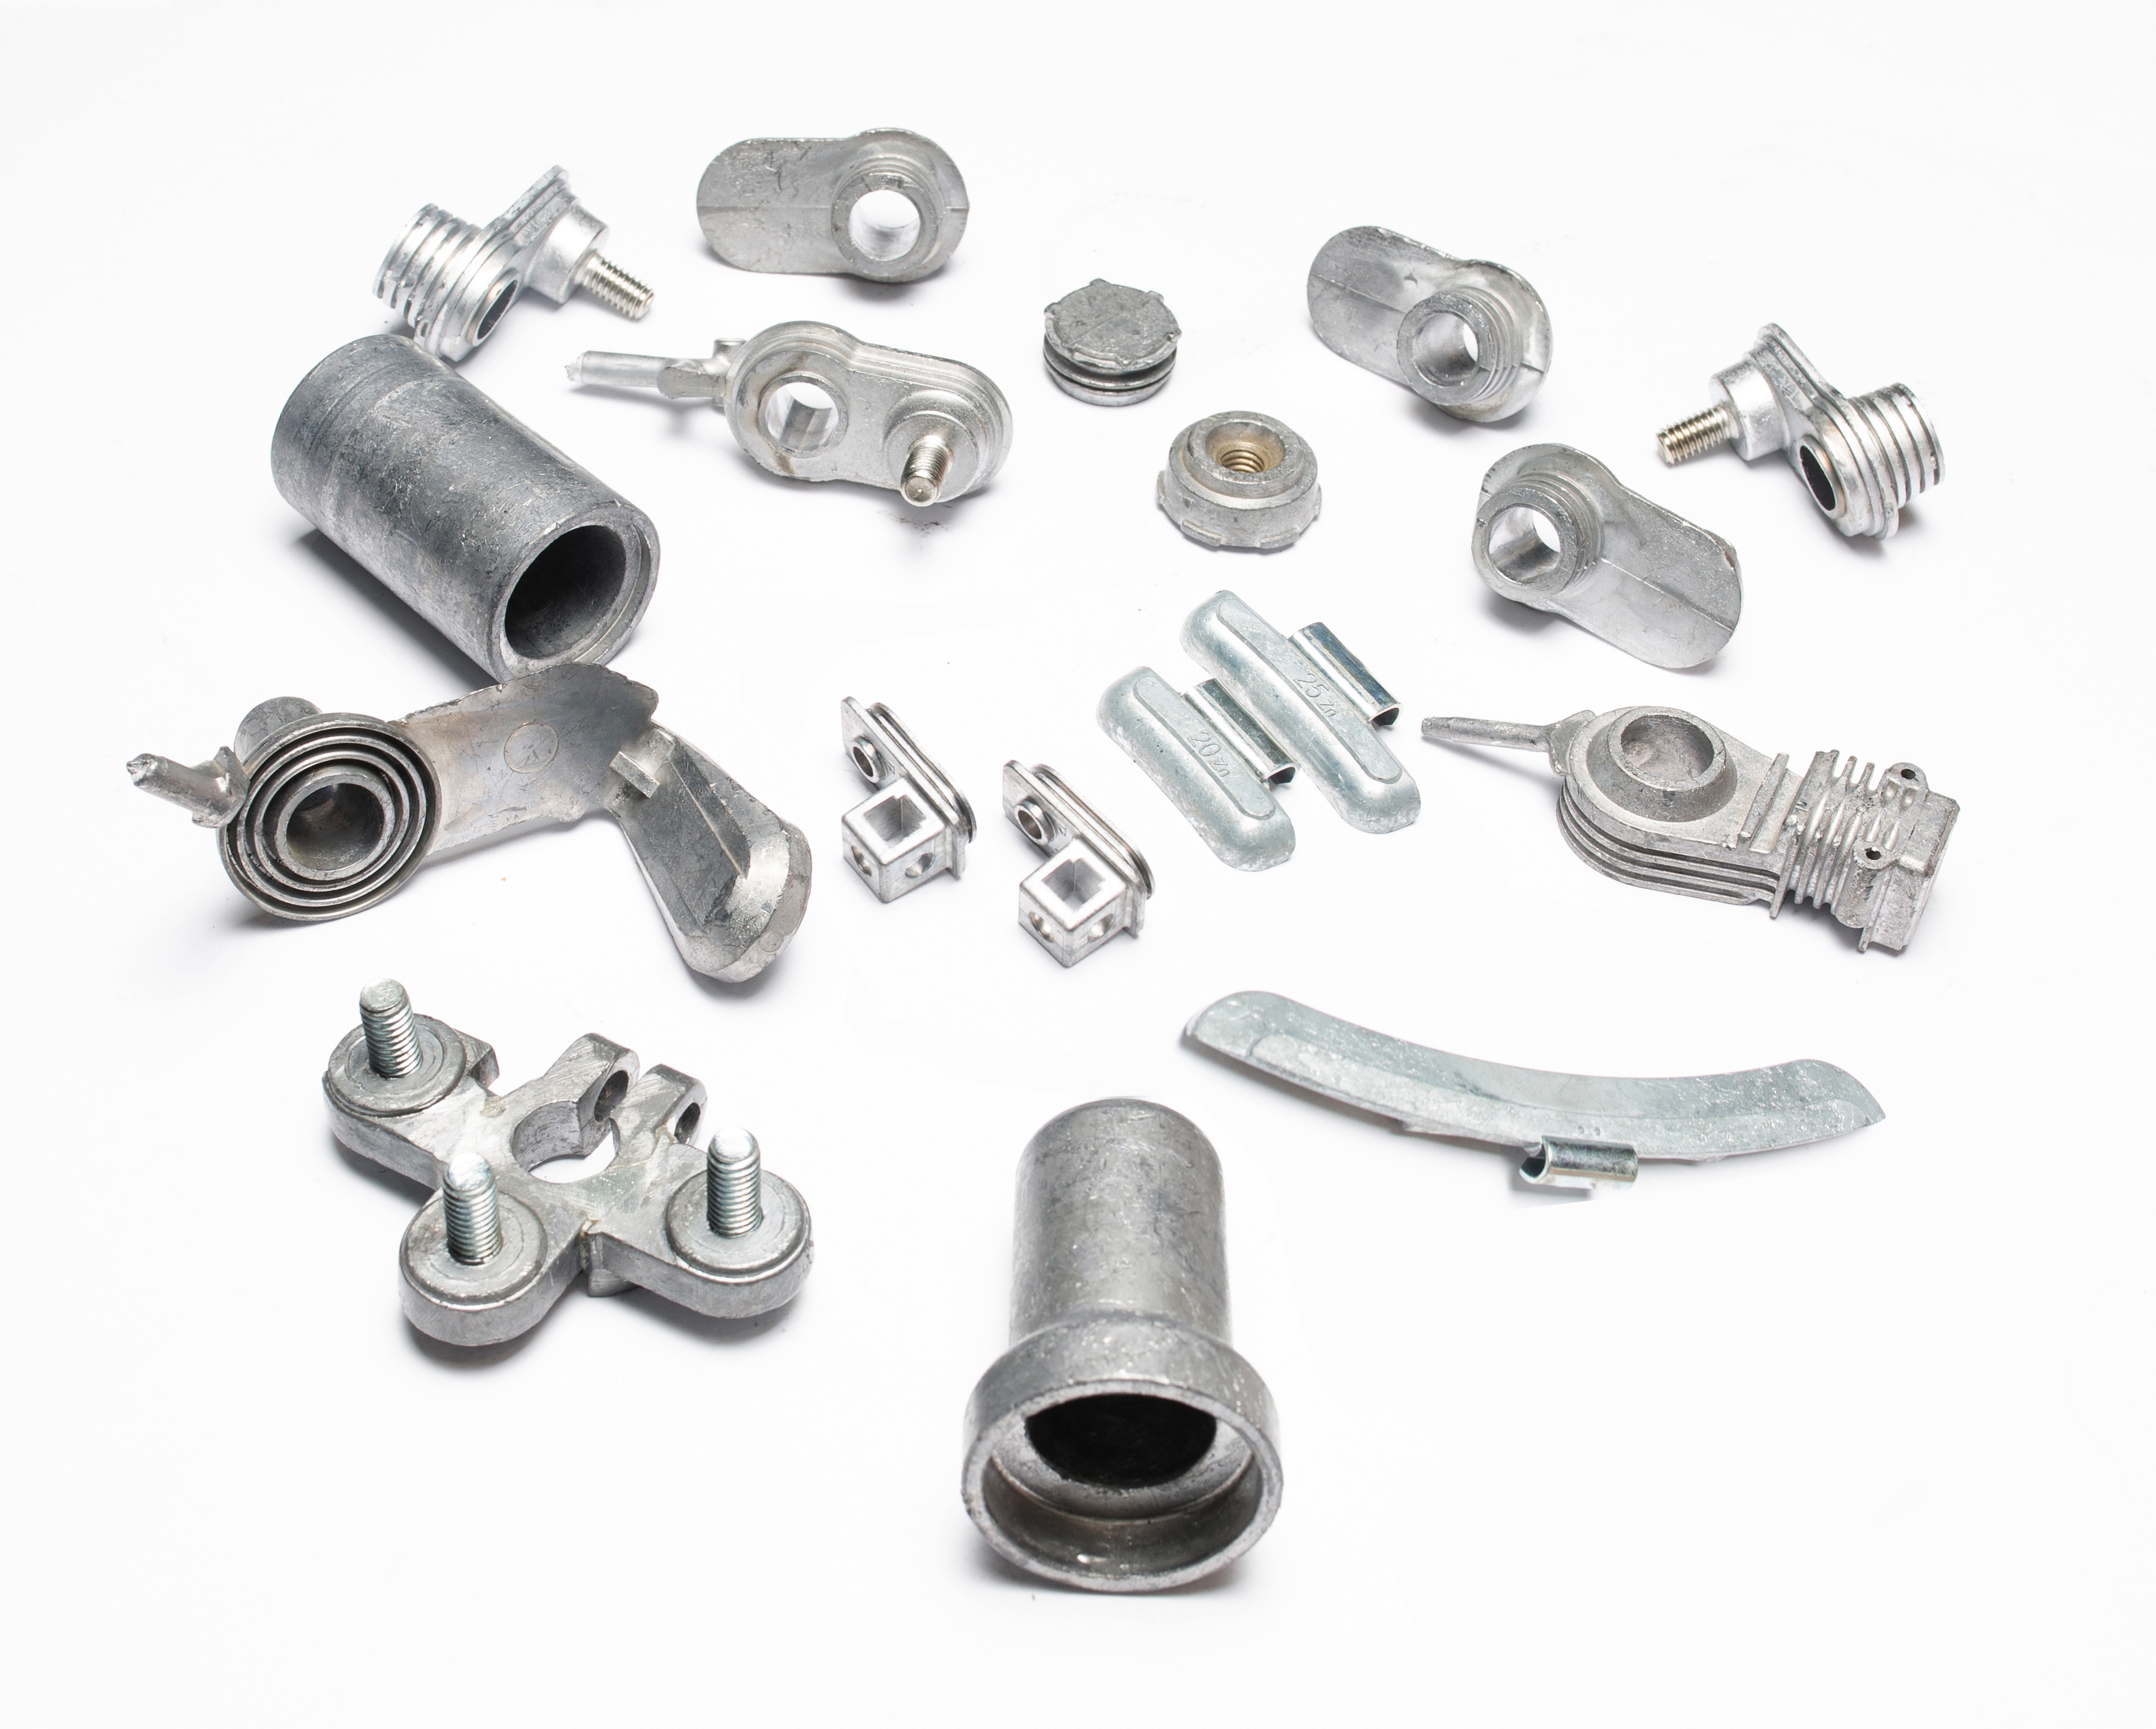 LEAD DIE CASTING TECHNOLOGY